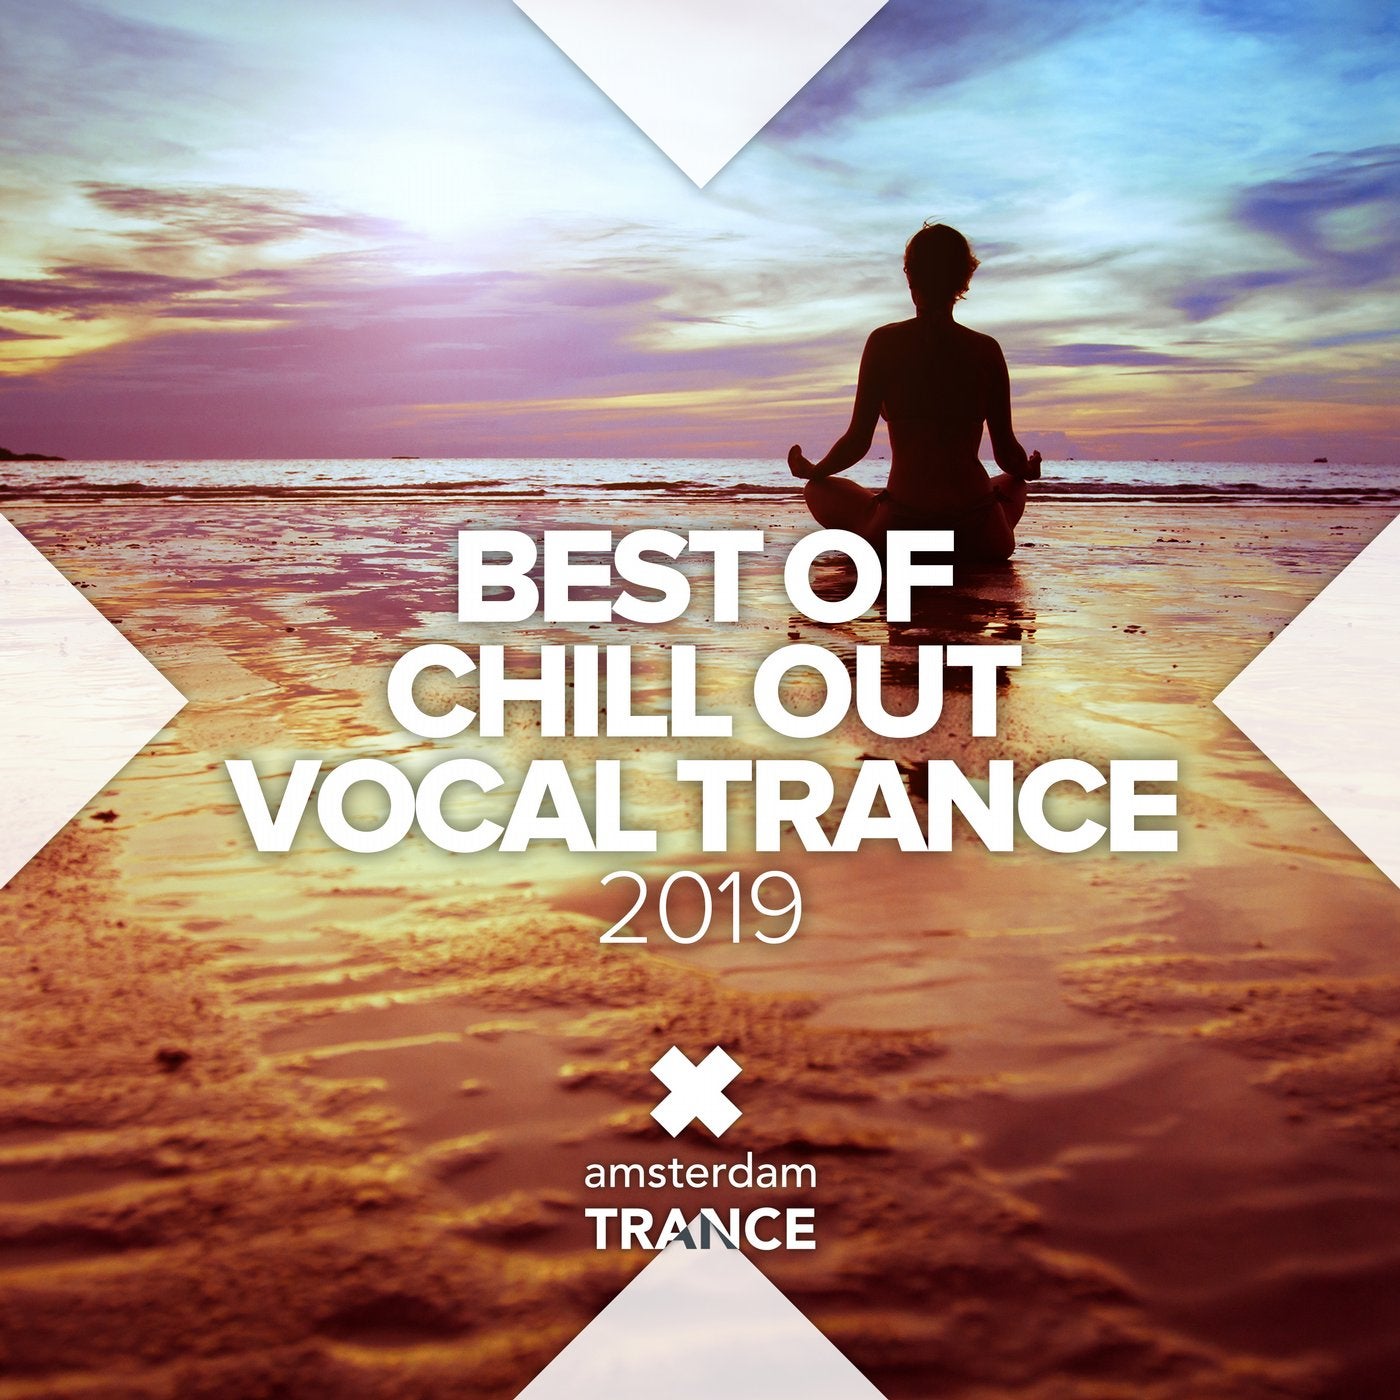 Best chillout music. The best of Chillout. Chillout Trance. Вокал Trance. Vocal Trance Music.